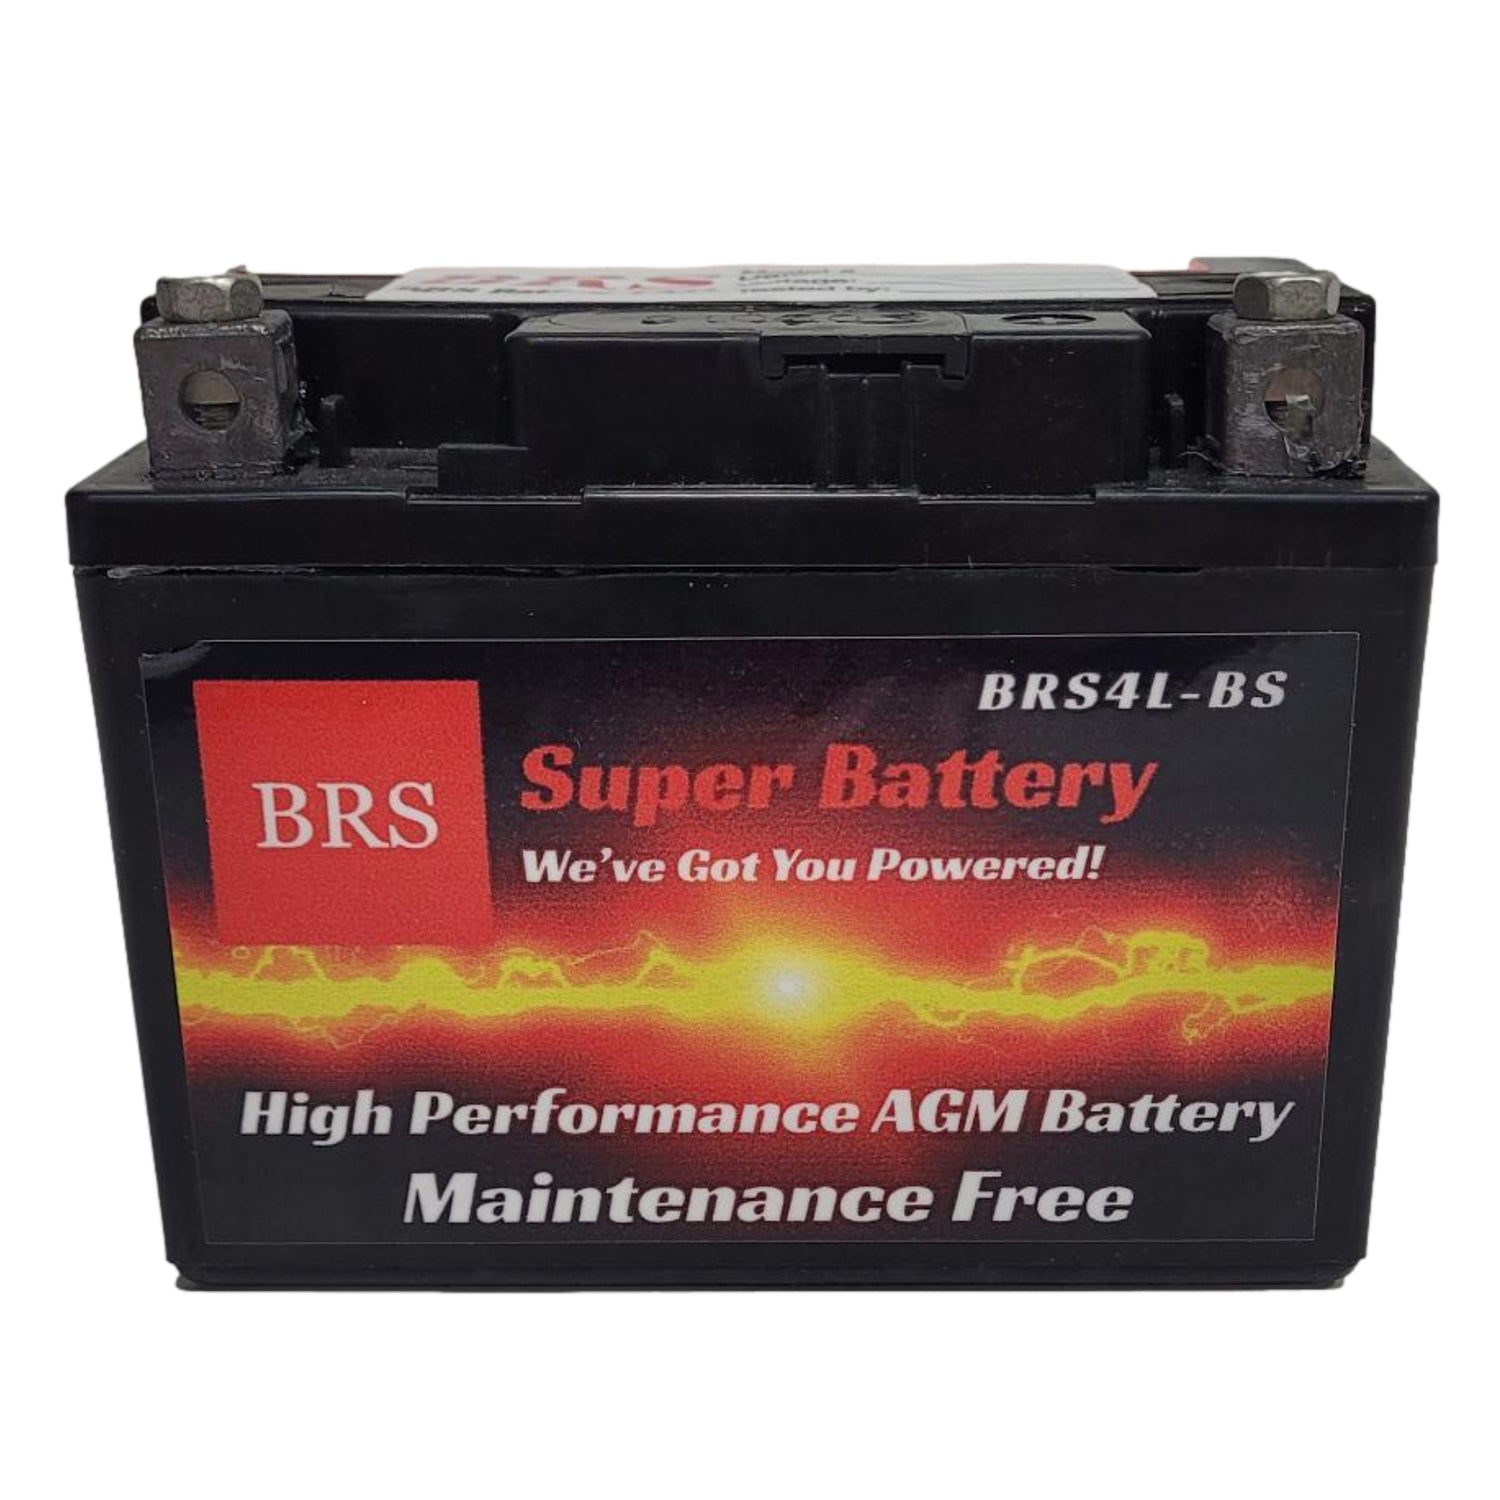 WPX4L-BS 12v High Performance Sealed AGM PowerSport 2 Year Battery - BRS Super Battery